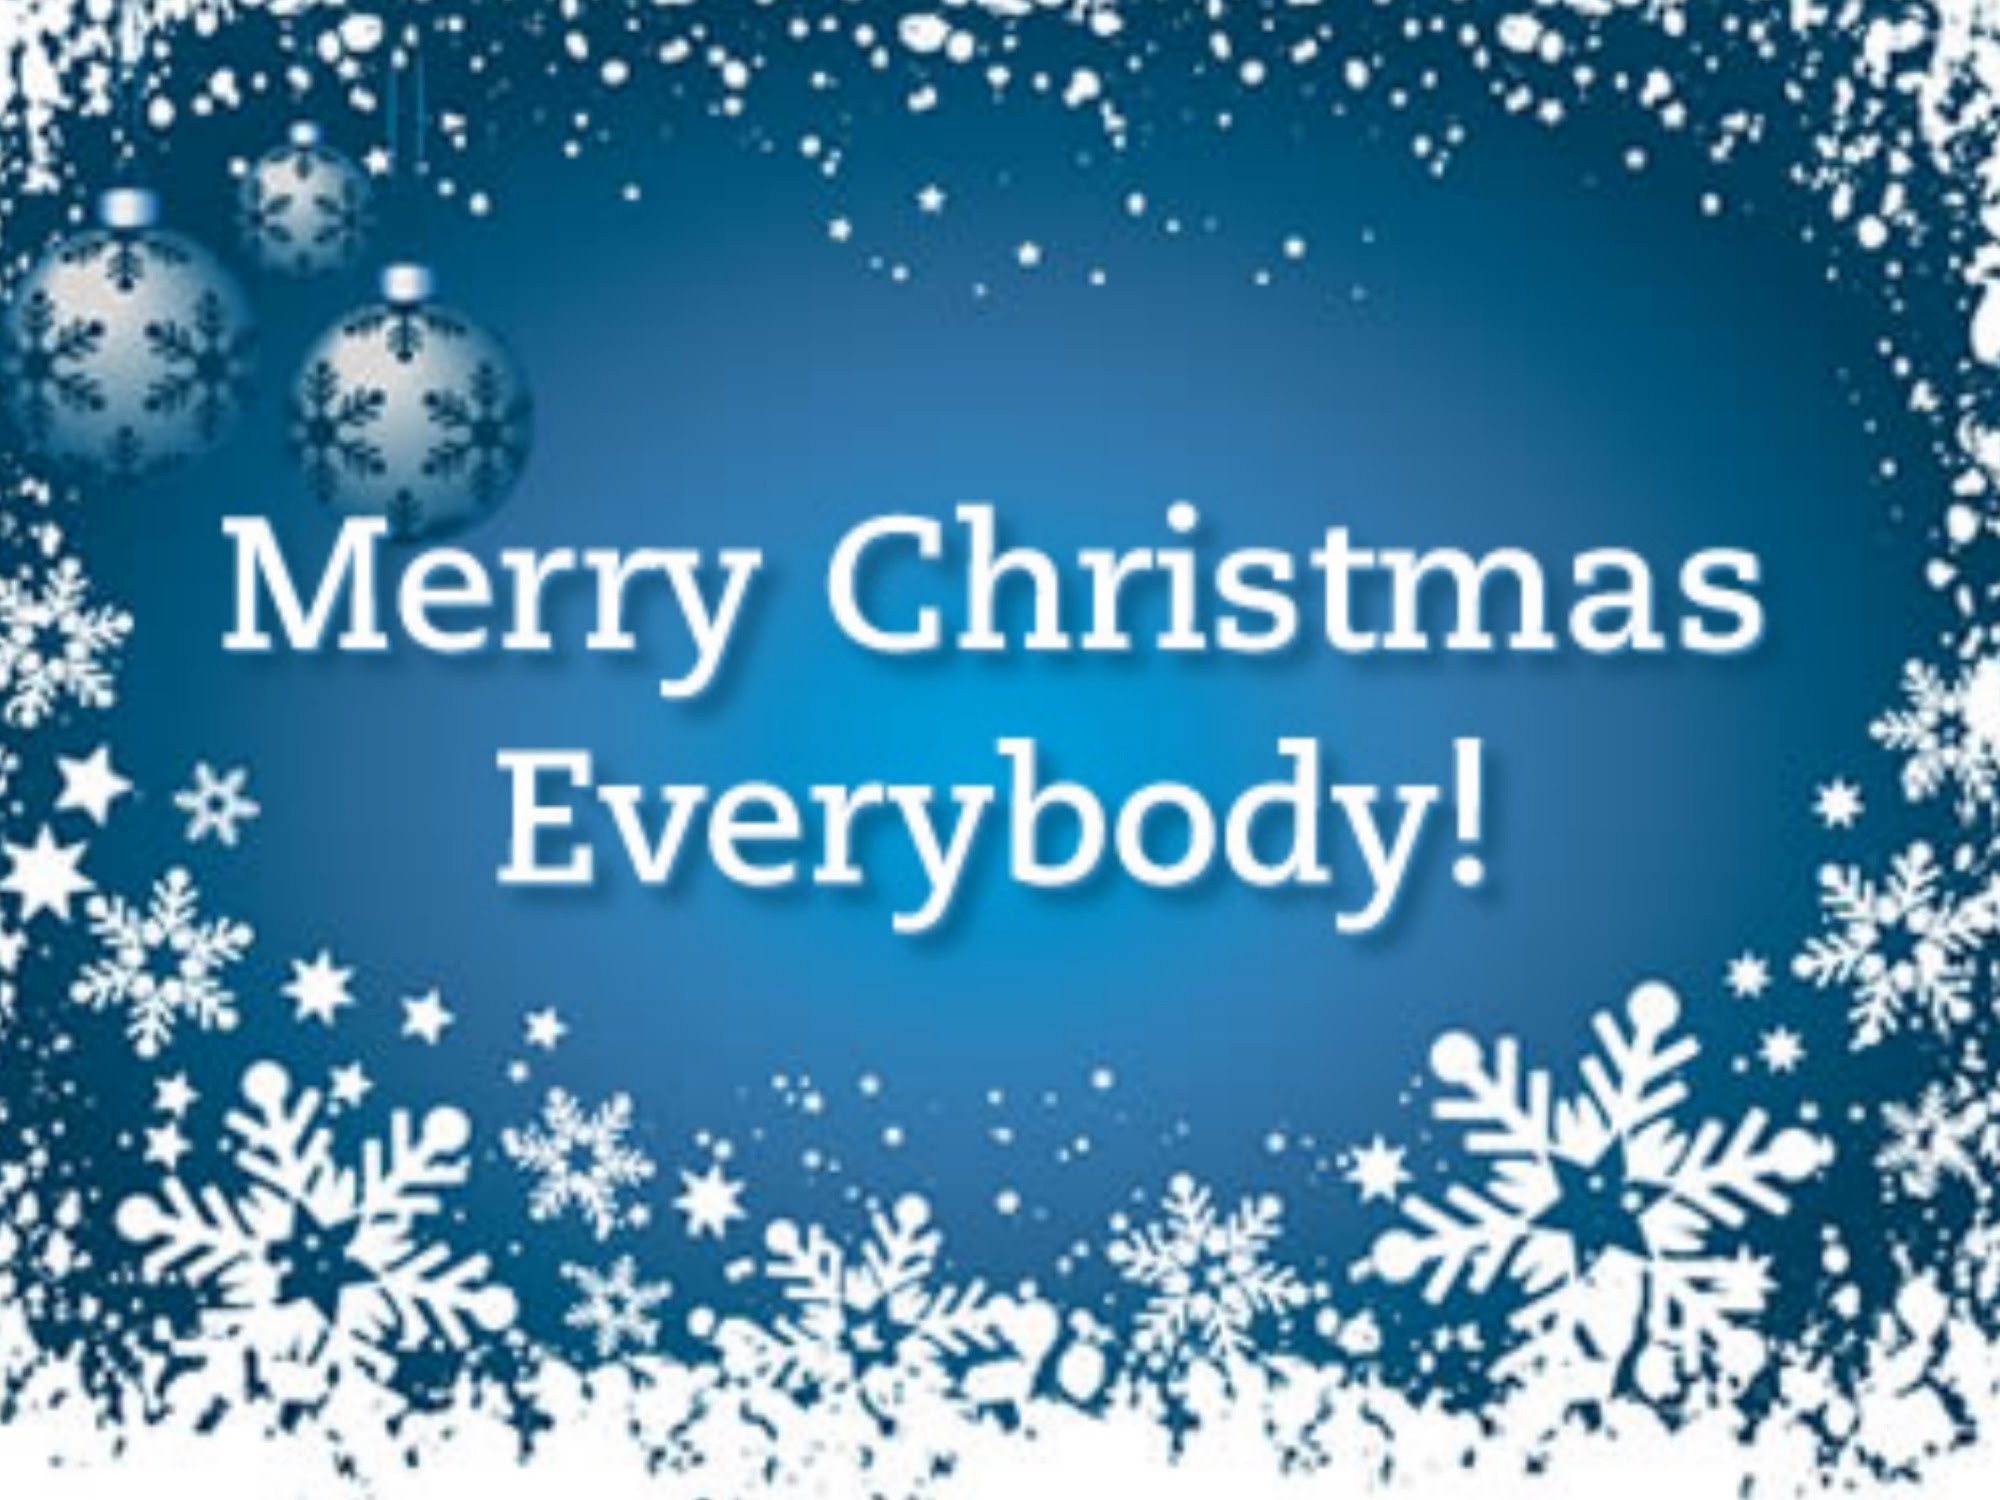 Merry Christmas Everyone Quote
 Download Free Printable Graphics Wallpaper Posters